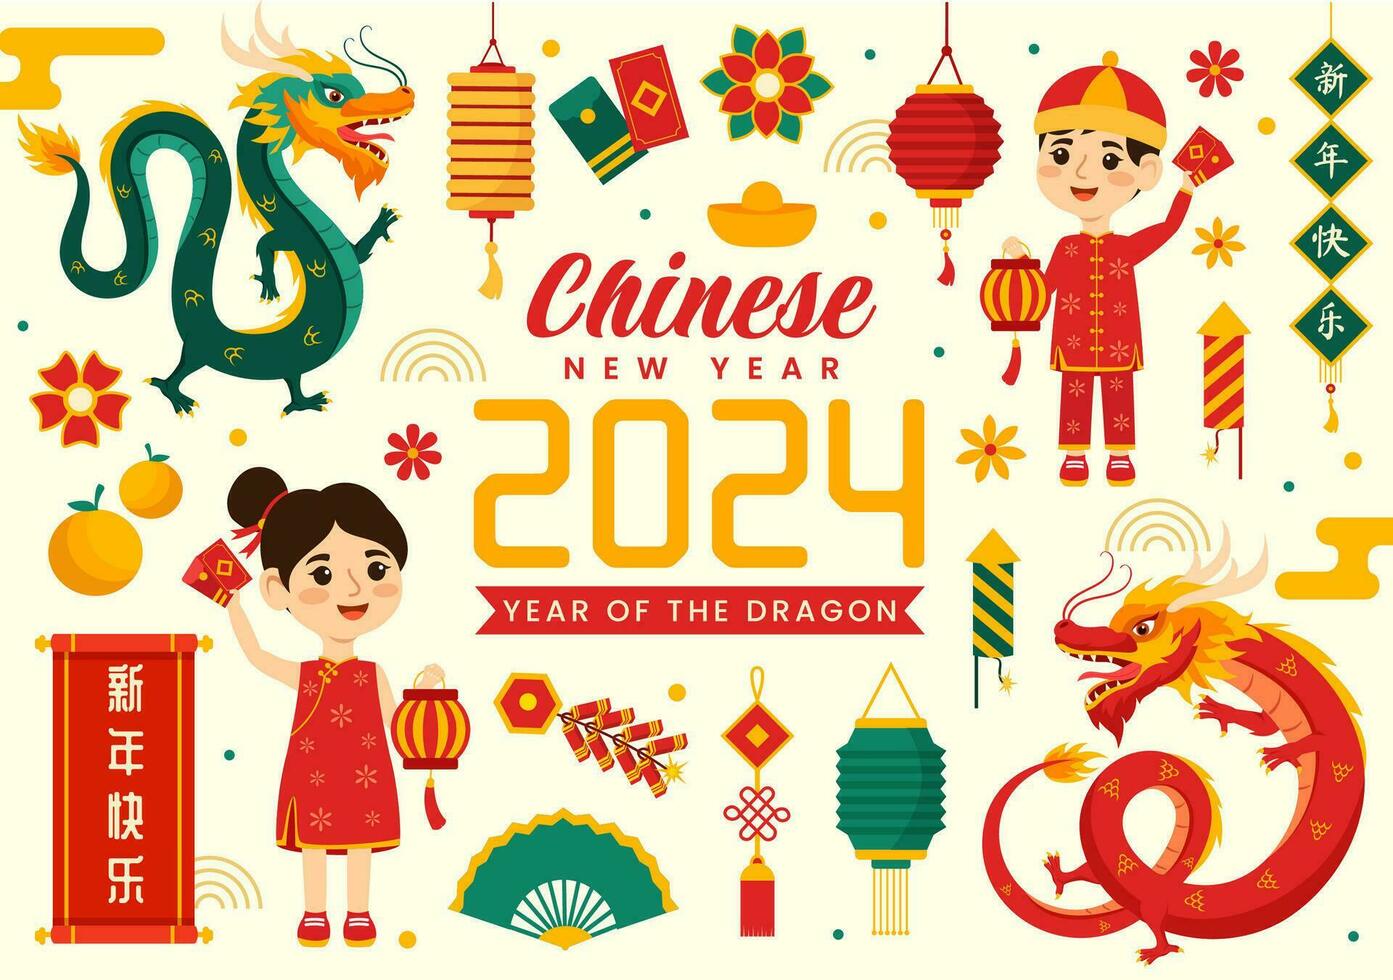 Happy Chinese New Year 2024 Vector Illustration. Translation Year of the Dragon. with Flower, Lantern, Dragons and China Elements on Background